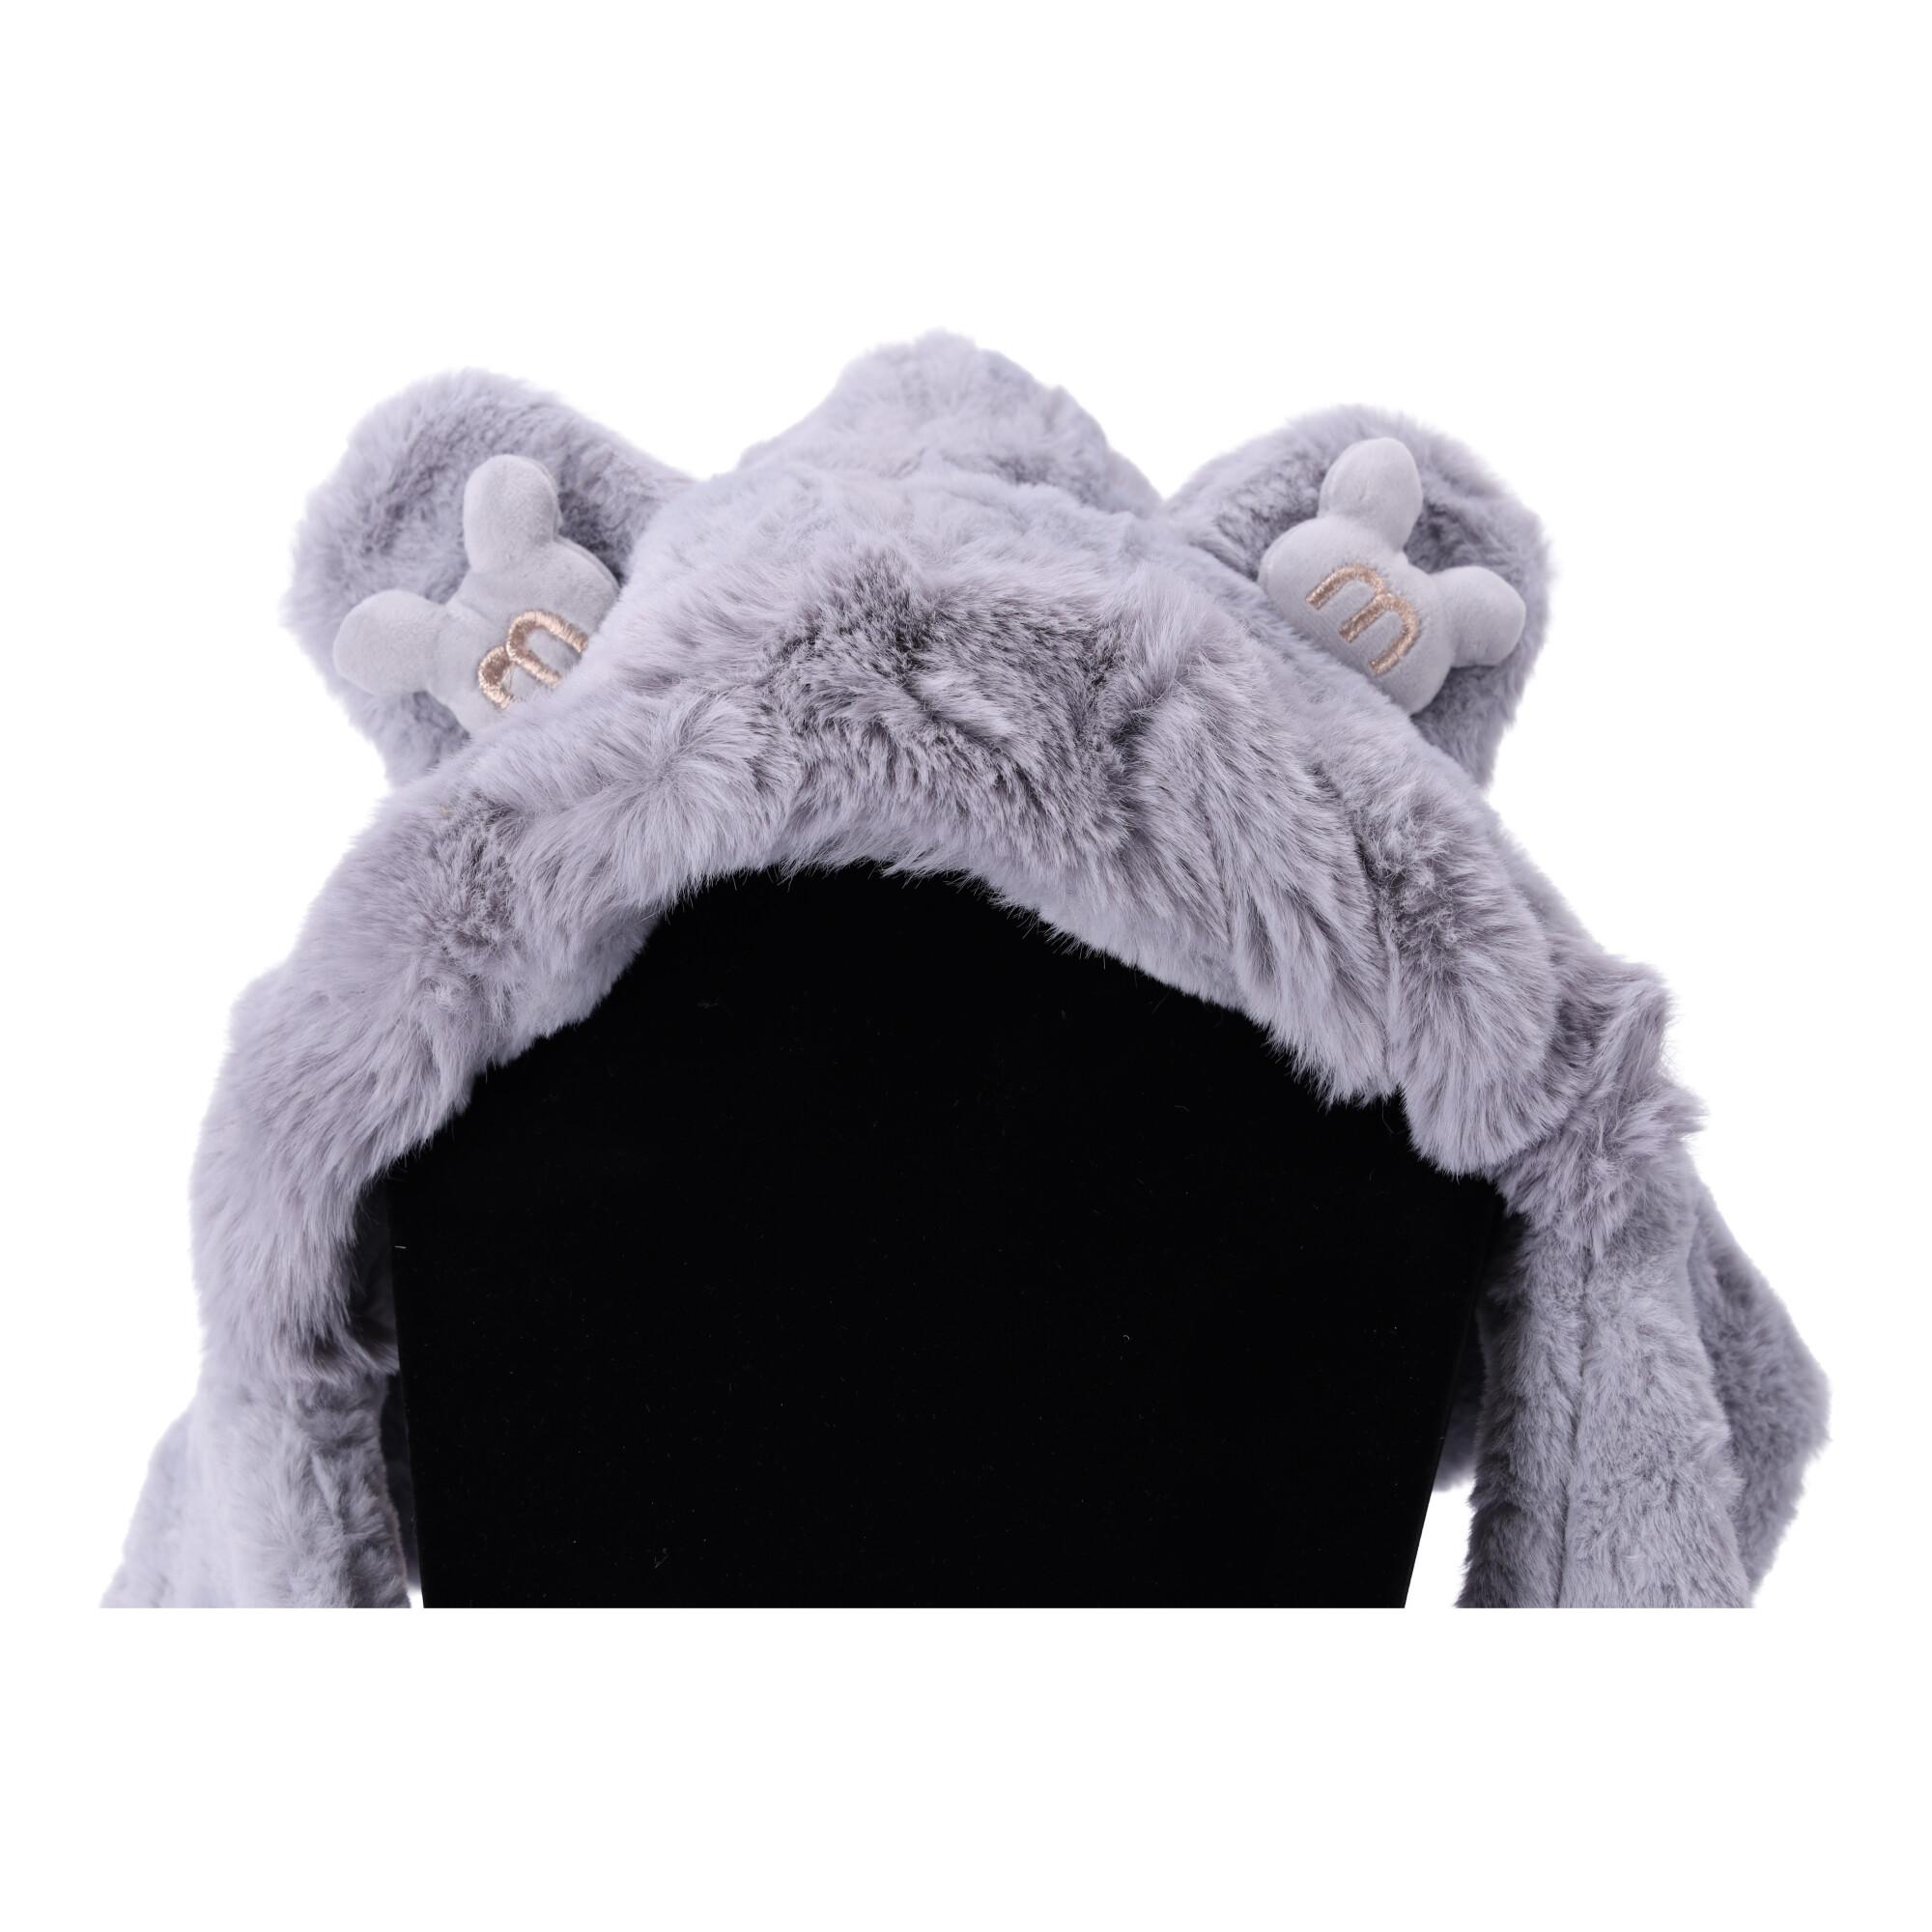 Children's plush hat with a scarf and 3in1 gloves for children from 2 to 12 years old - gray